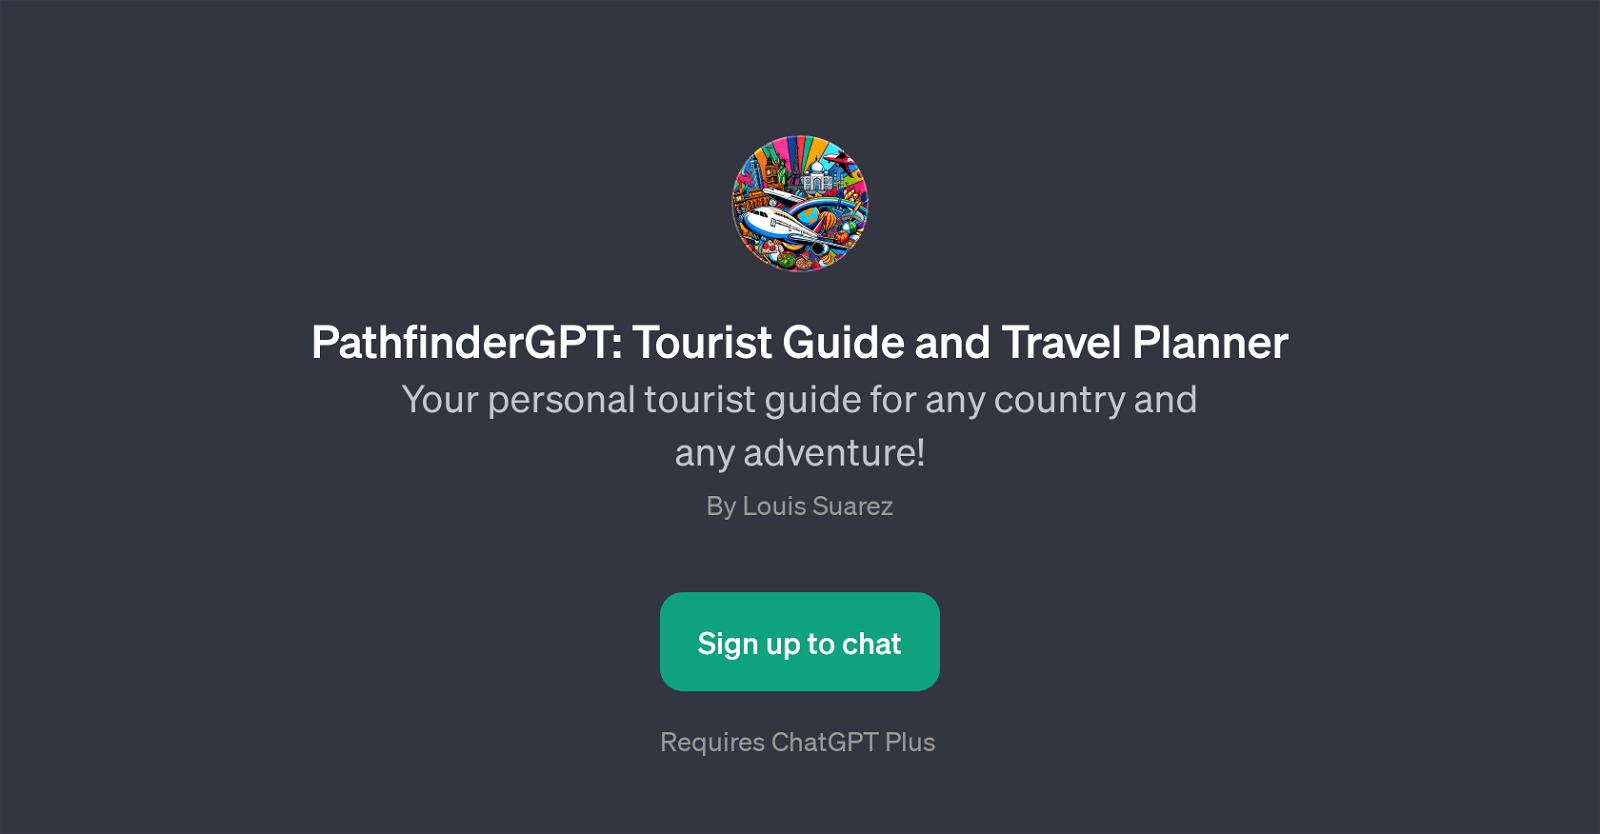 PathfinderGPT: Tourist Guide and Travel Planner website